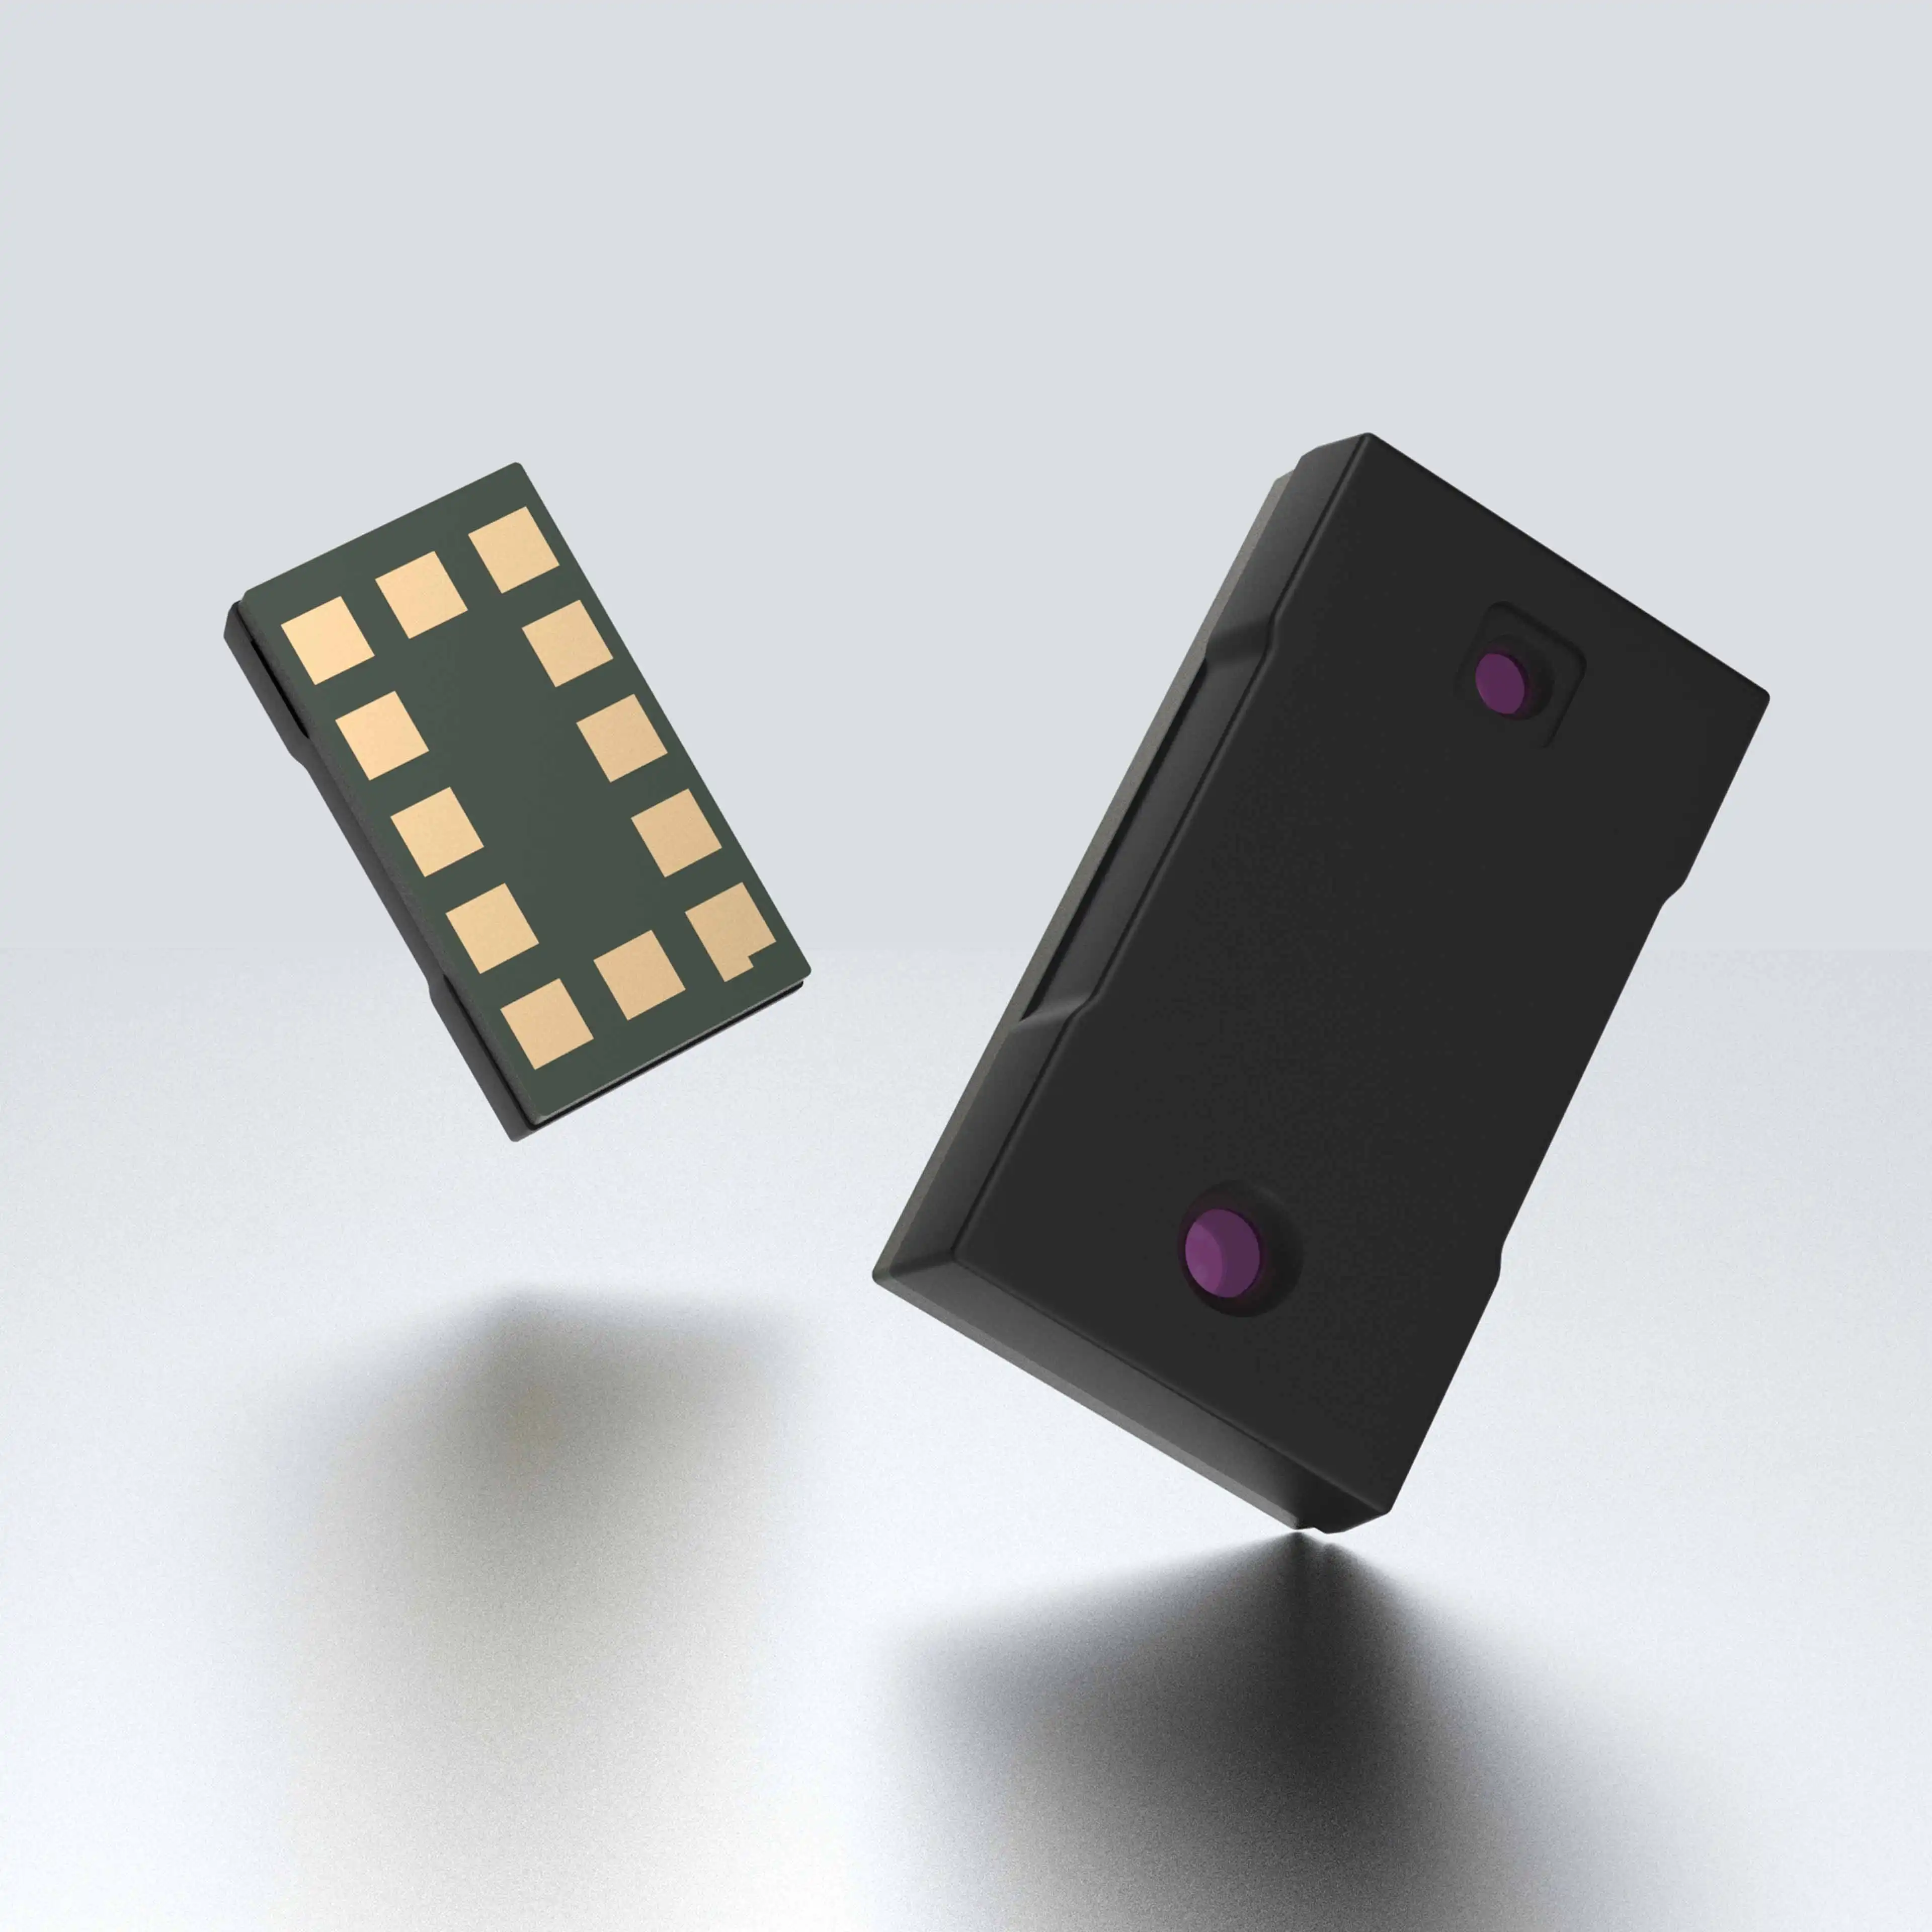 low price Highly integrated  highly accurate miniature dToF ranging module for various application scenarios